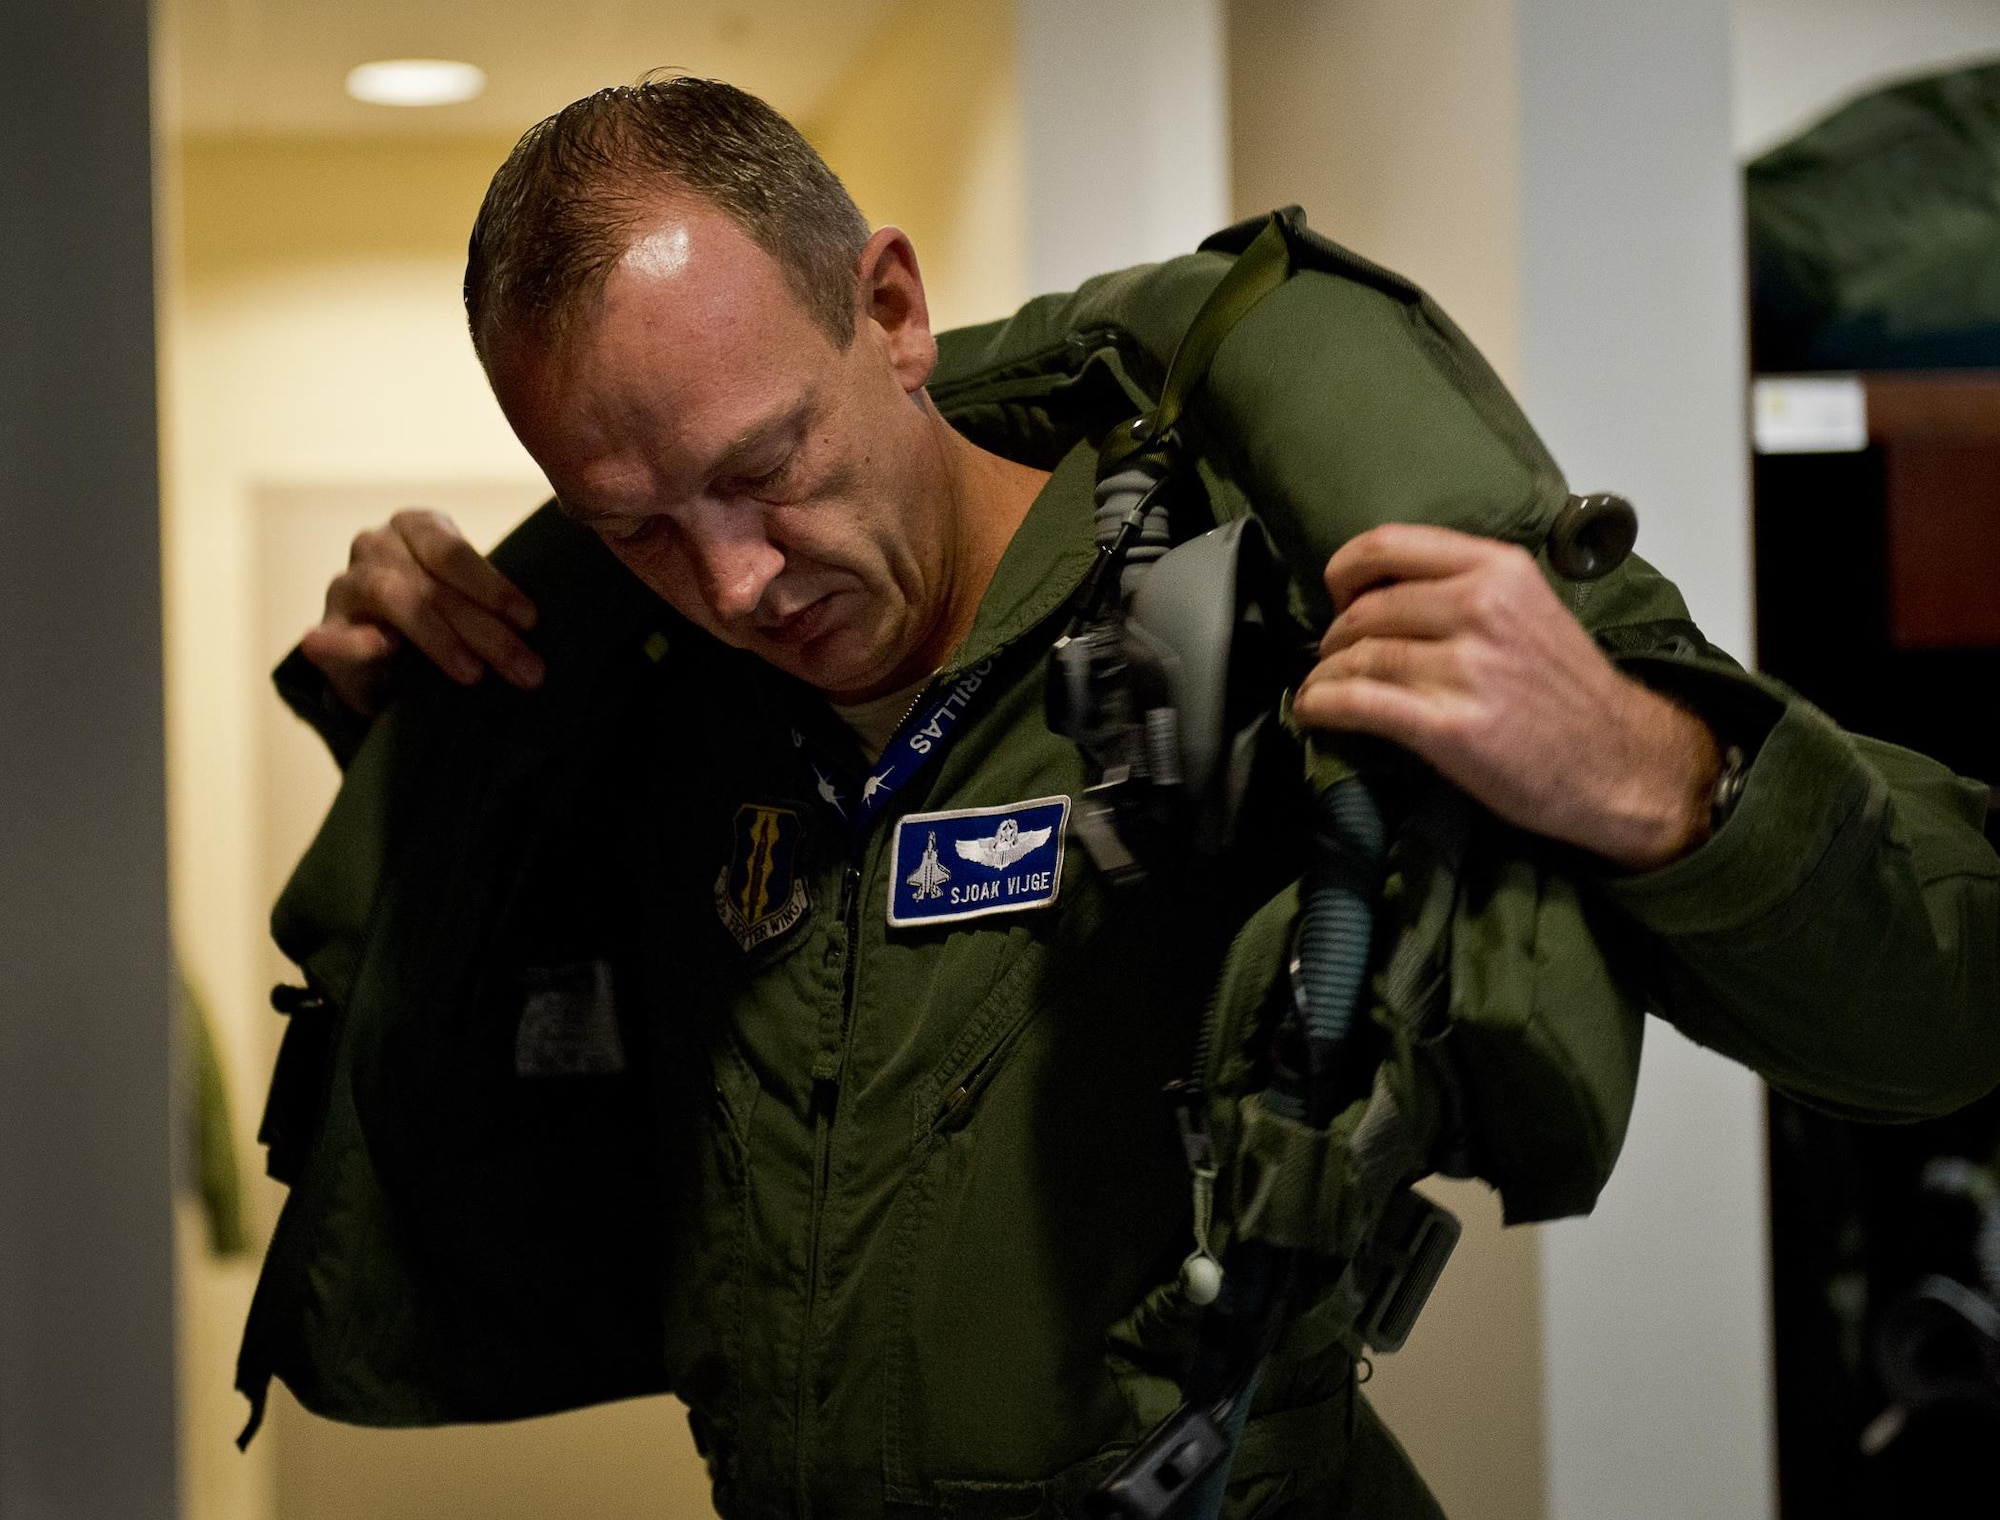 Maj. Laurens Vijge, a Royal Netherlands Air Force pilot, makes adjustments while in the seat of an F-35A Lightning II prior to his first flight in the aircraft Dec. 18 at Eglin Air Force Base, Fla. Vijge became the Royal Netherlands Air Force F-35 Integrated Training Center training lead, completed his first flight after 210 hours of classroom training and 13 flights in the simulators (U.S. Air Force photo/Samuel King Jr.) 